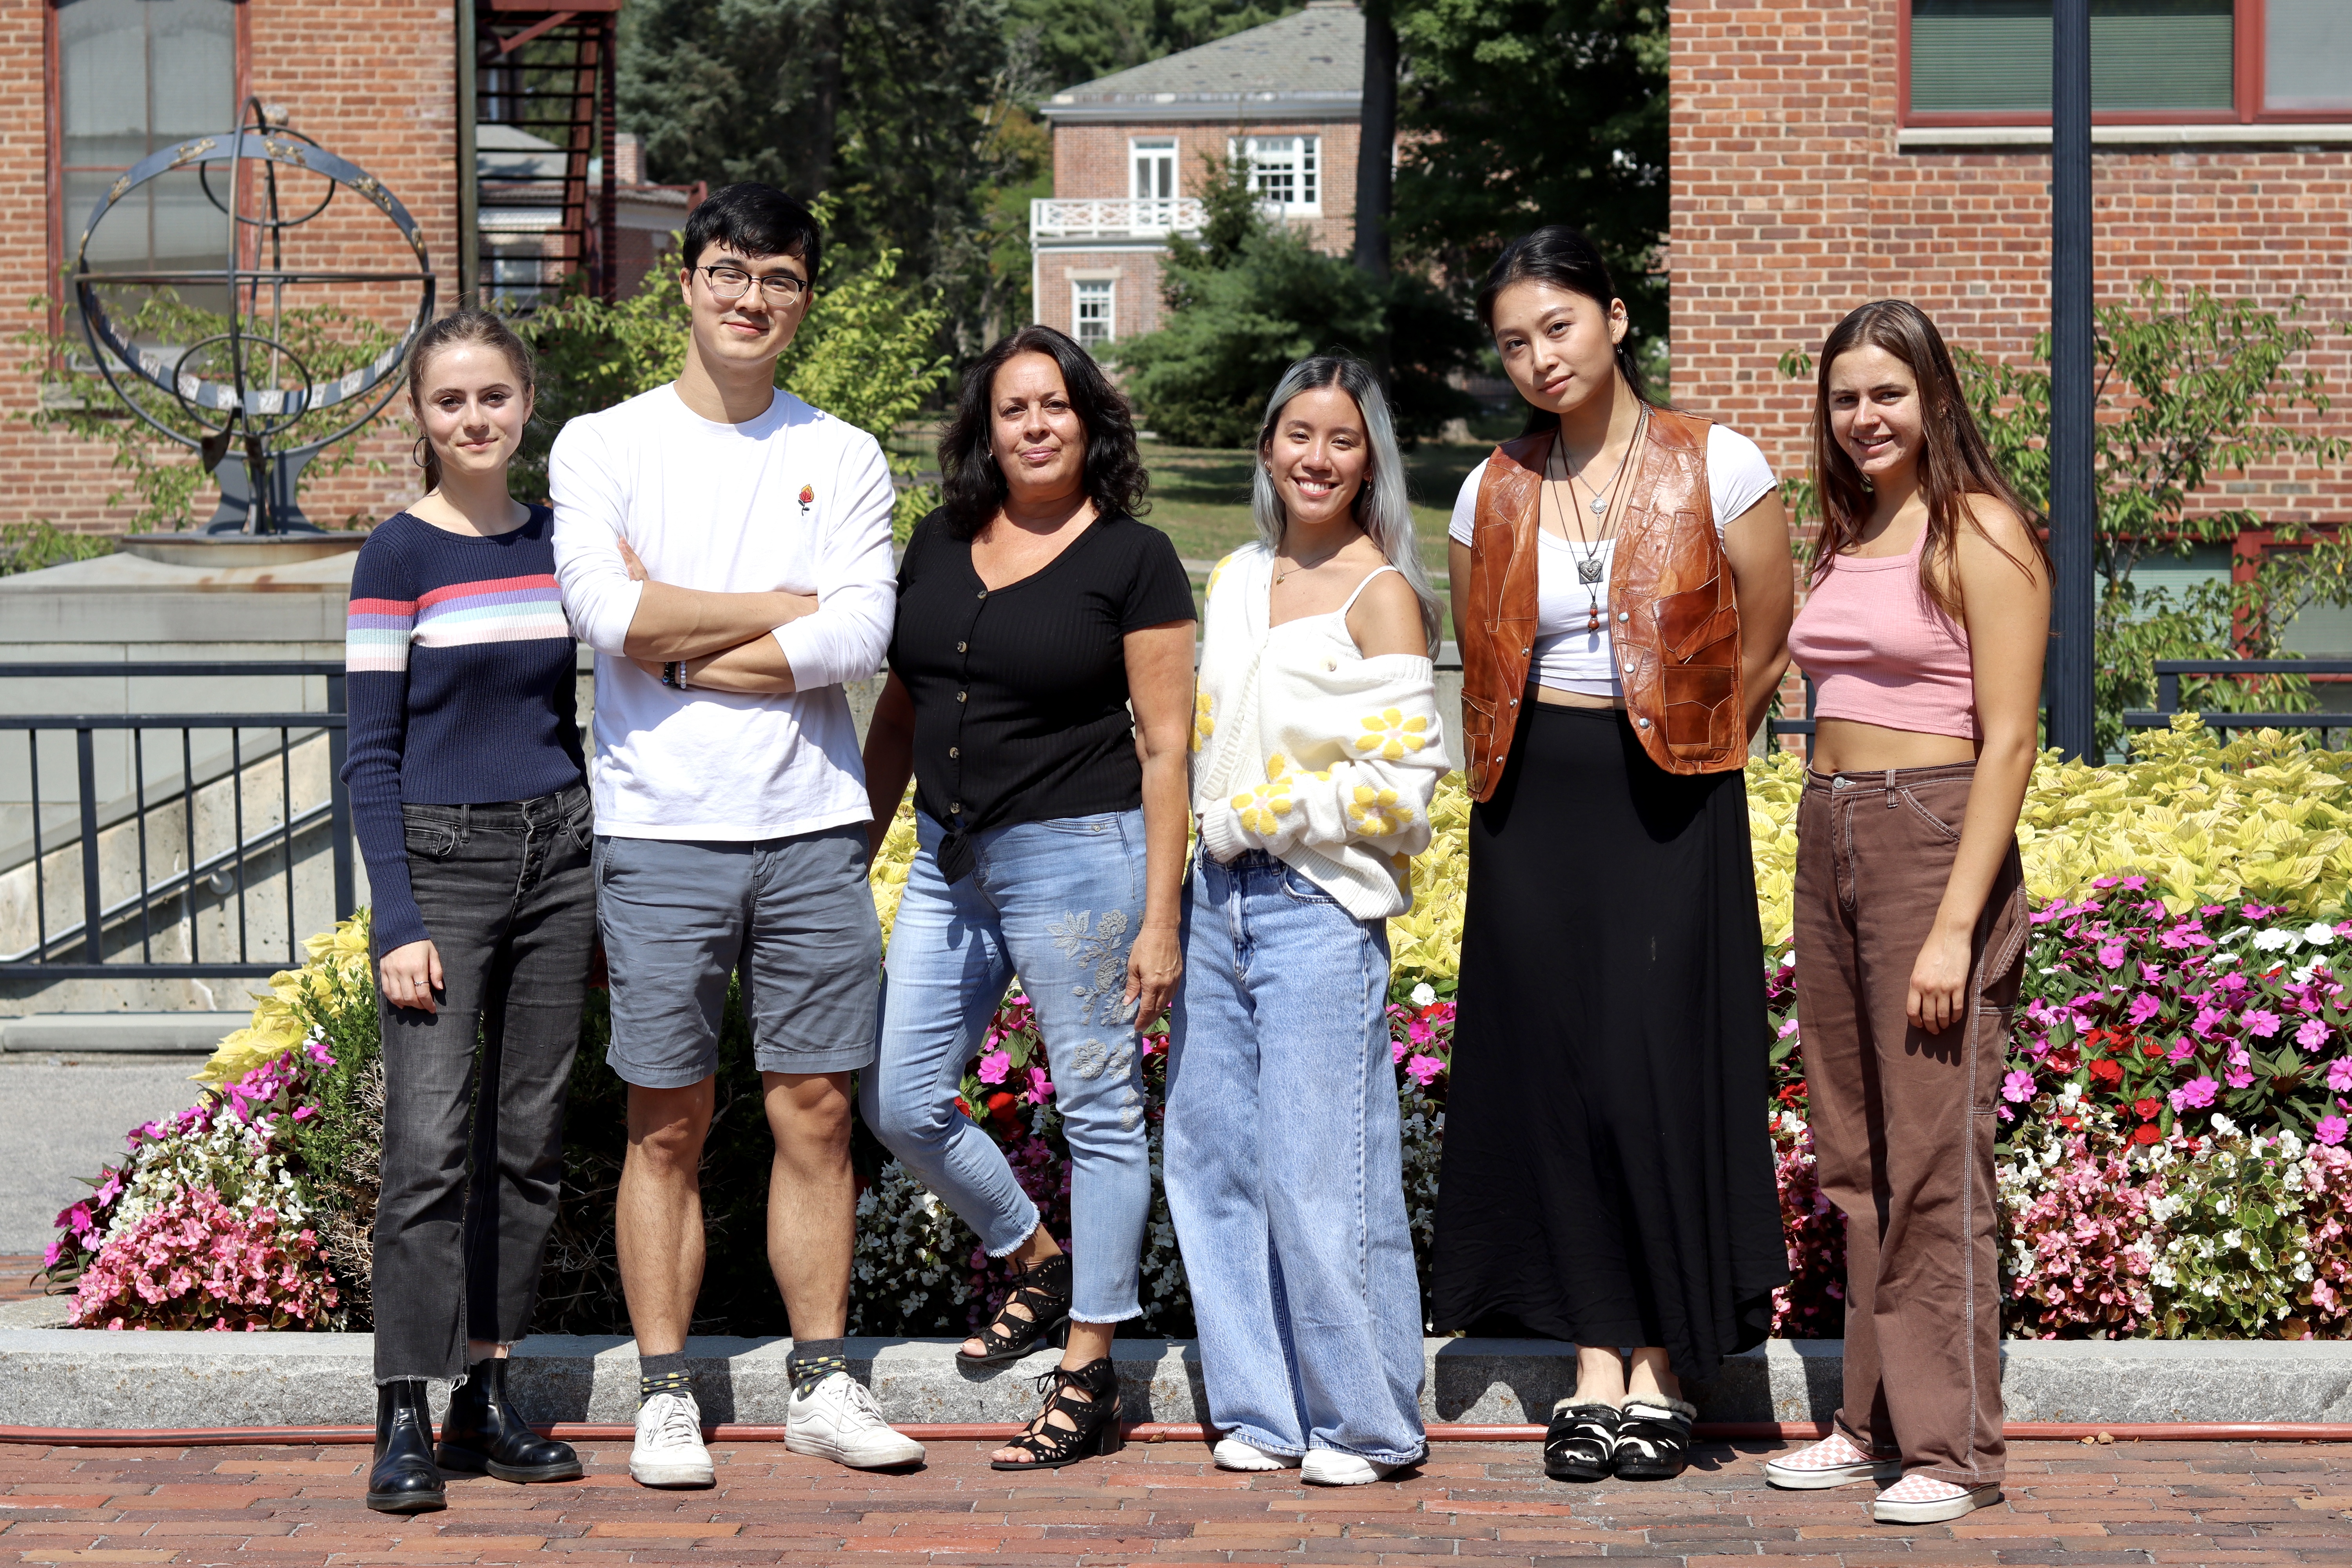 (left to right: Sophia Fredericks '26, Tim Nguyen '23, Joan Gerardi, Ana Leon Urrutia '26, Vi To '23, Alejandra Robins '24) - Students outside standing for picture in front of flowers